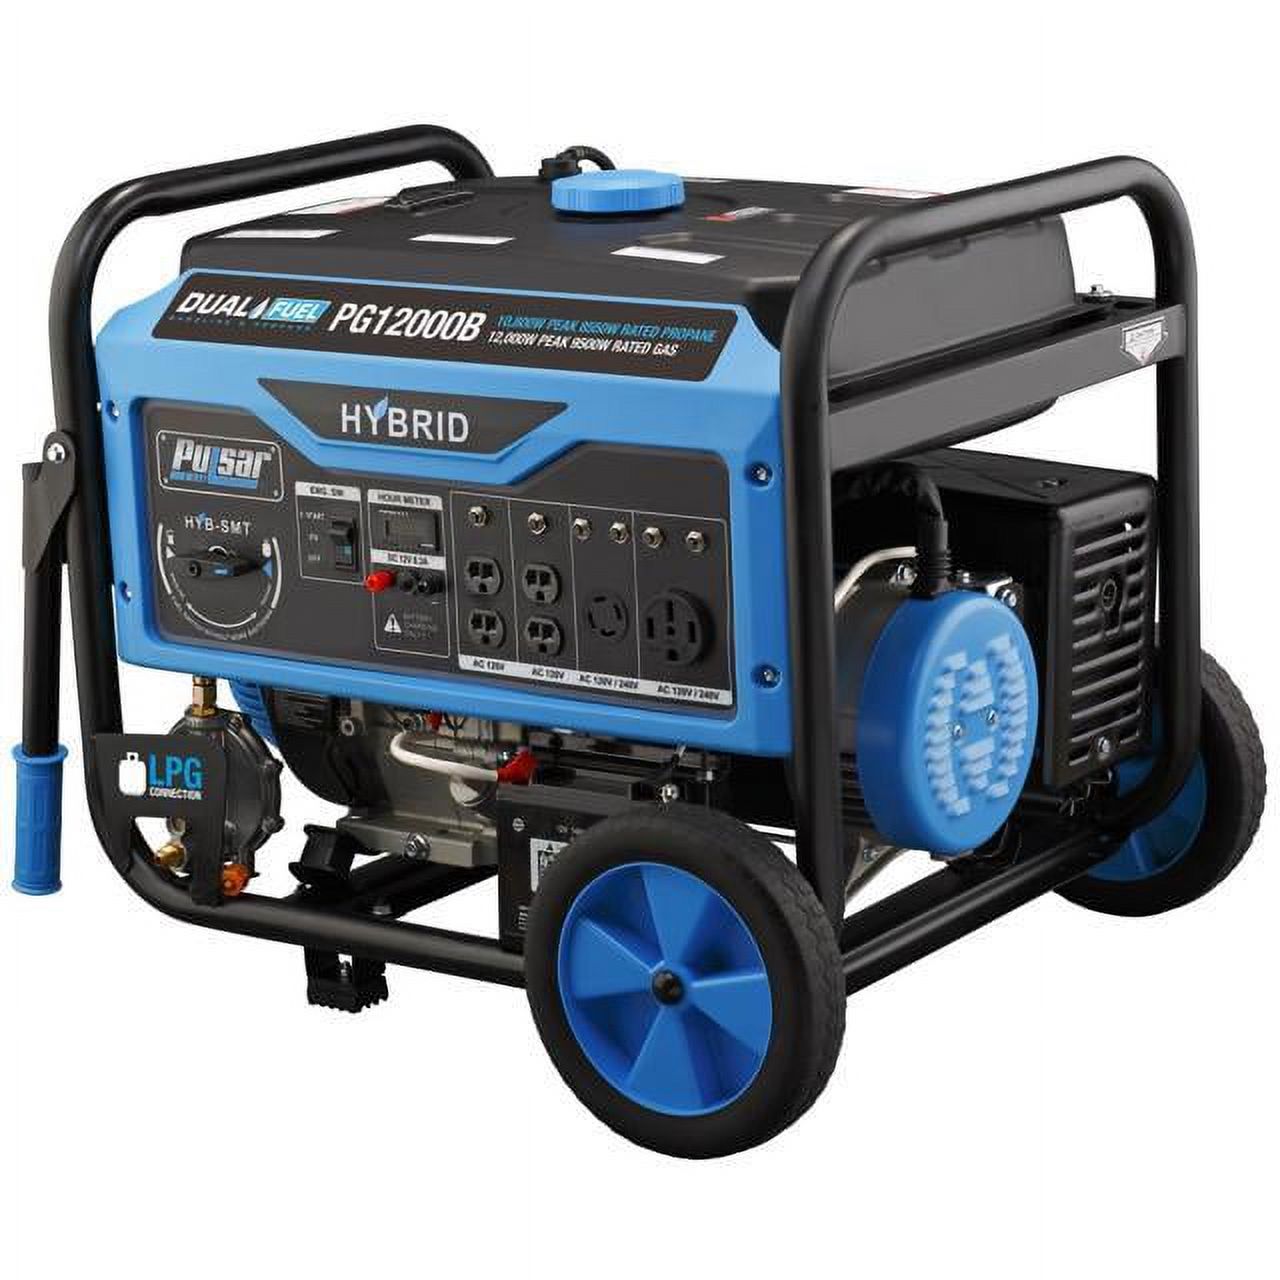 Pulsar 12,000W Dual Fuel Portable Generator with Electric Start – CARB Compliant - image 3 of 7